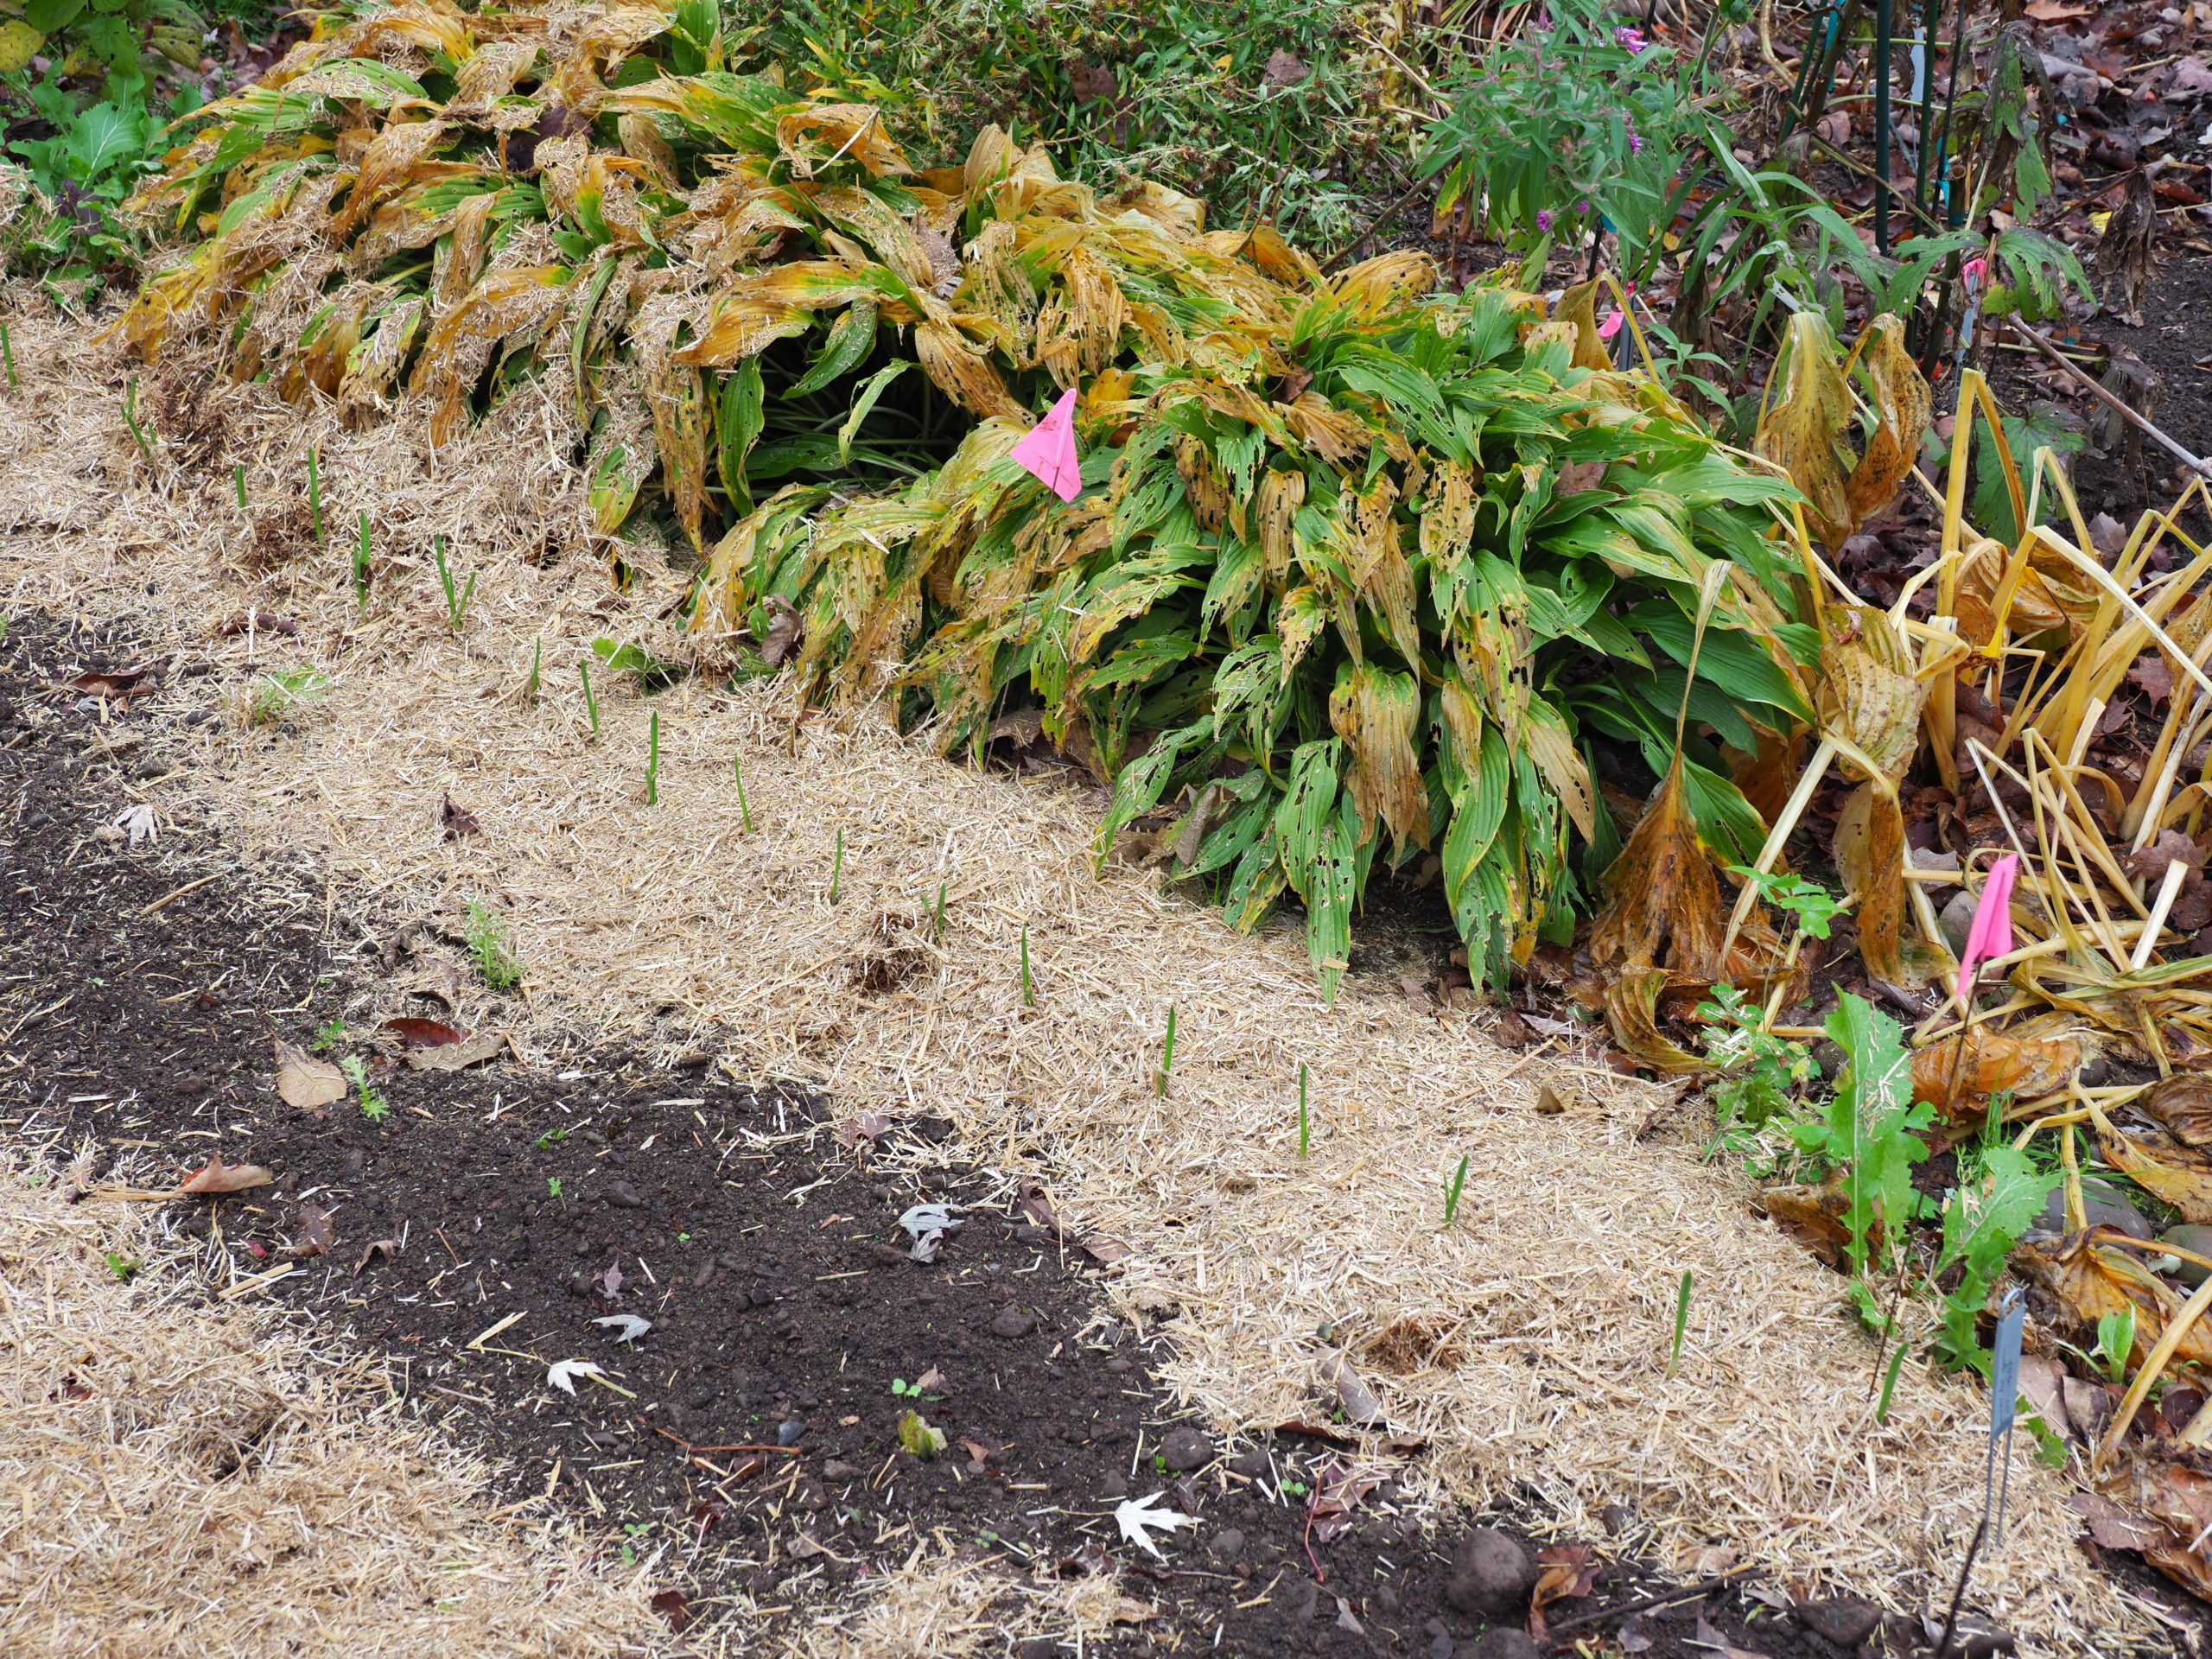 A row of garlic planted on October 10 showed signs of sprouting after a warm spell. With freezing temps weeks later, a light mulch was added. Two weeks later, before the latest freeze, 2 inches of maple leaves were added.